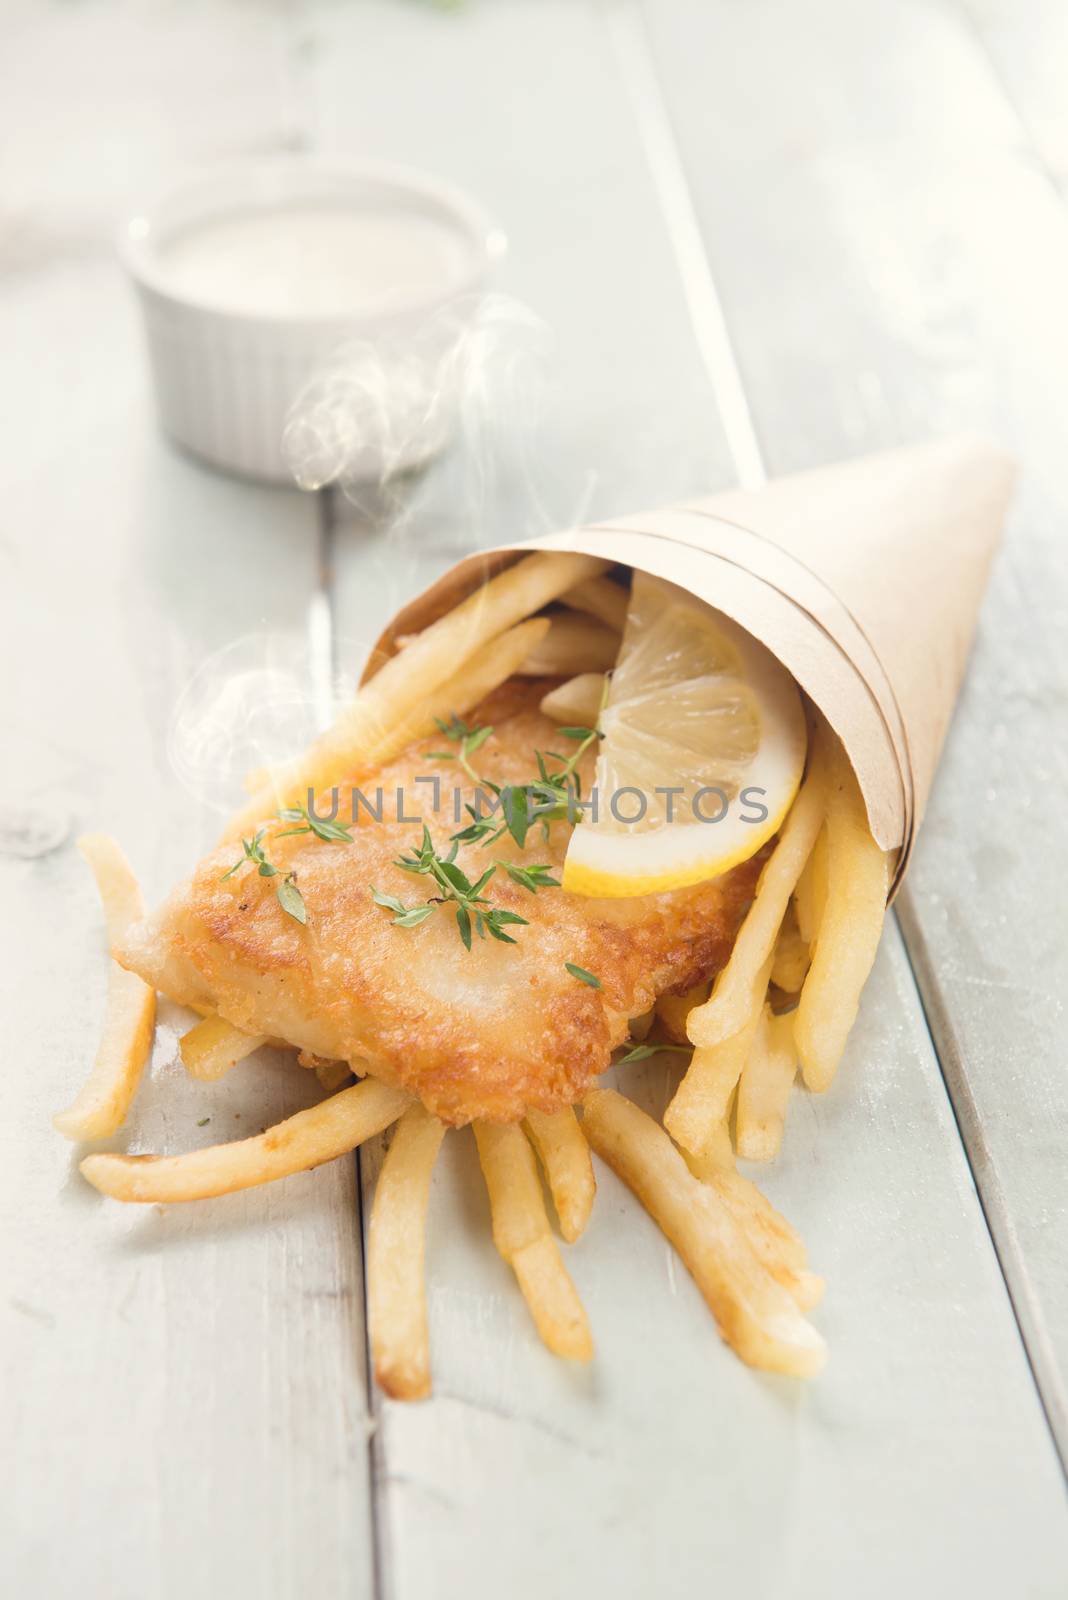 Fish and chips. Fried fish fillet with french fries wrapped by paper cone, on bright wooden background. Fresh cooked with hot smoke.